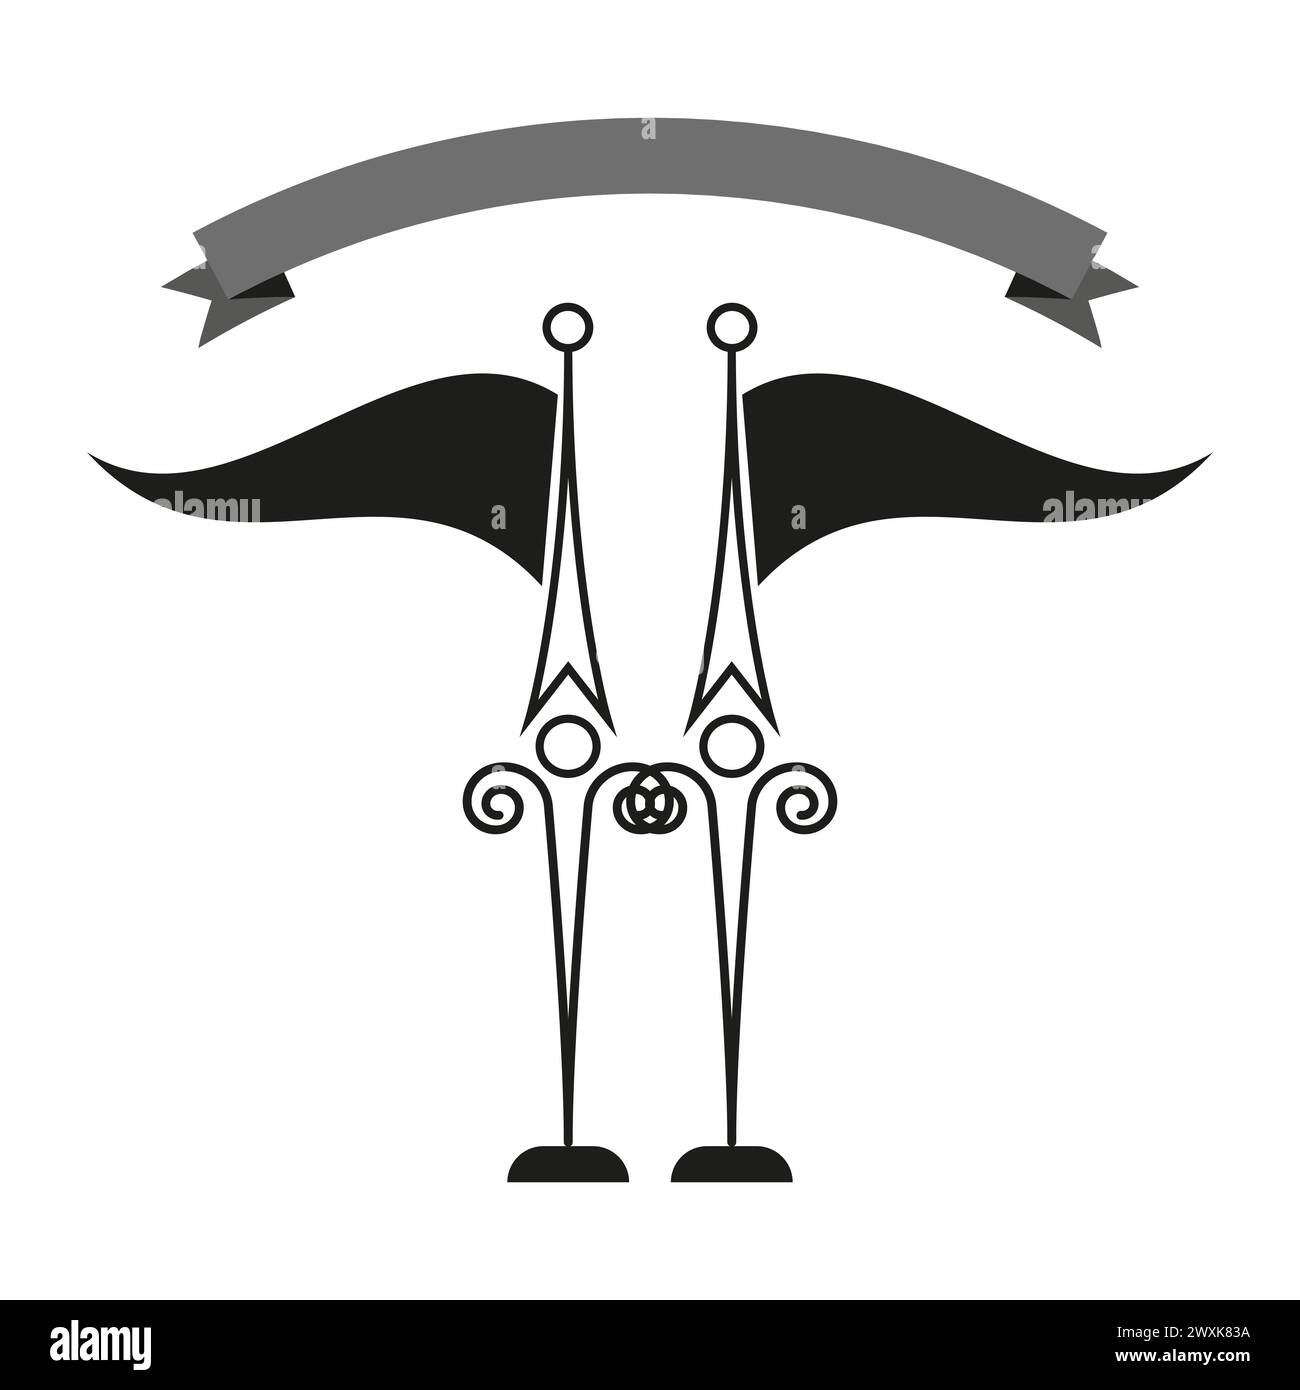 Medieval banner and swords emblem. Heraldic symbol design. Knightly weapon insignia. Vector illustration. EPS 10. Stock Vector